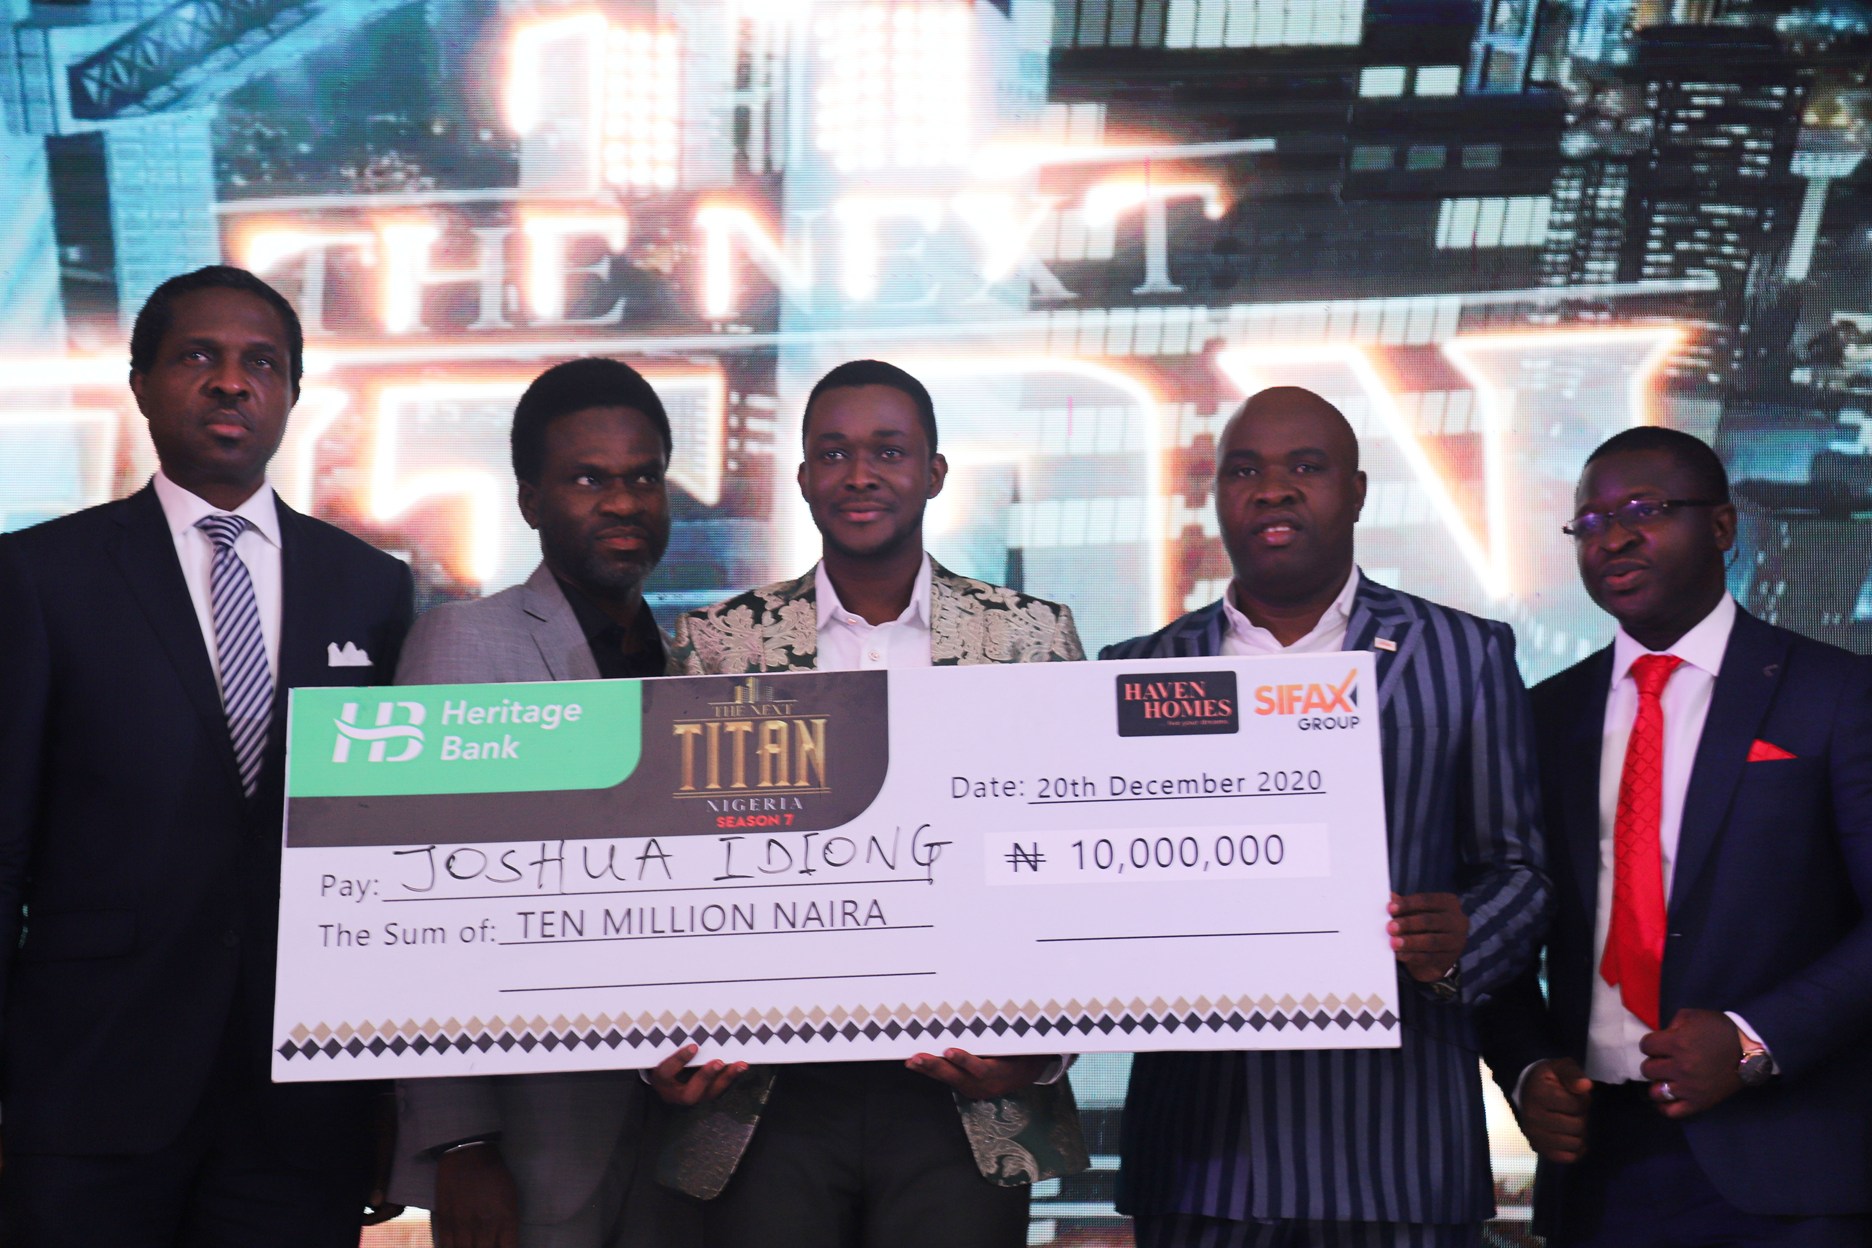 Tonye Cole, Judge, The Next Titan; Fela Ibidapo, Group Head, Corporate Communications, Heritage Bank; Joshua Idiong, Winner, The Next Titan Season 7; Honourable Victor Olotu, Group Head, Business Development and Strategic Planning, SIFAX Group and Abiola Ariyibi, Human Resources Officer, SIFAX Group at the grand finale of The Next Titan Entrepreneurial Reality TV show Season 7 sponsored by SIFAX Group and held at Oriental Hotel, Victoria Island, Lagos on Sunday.